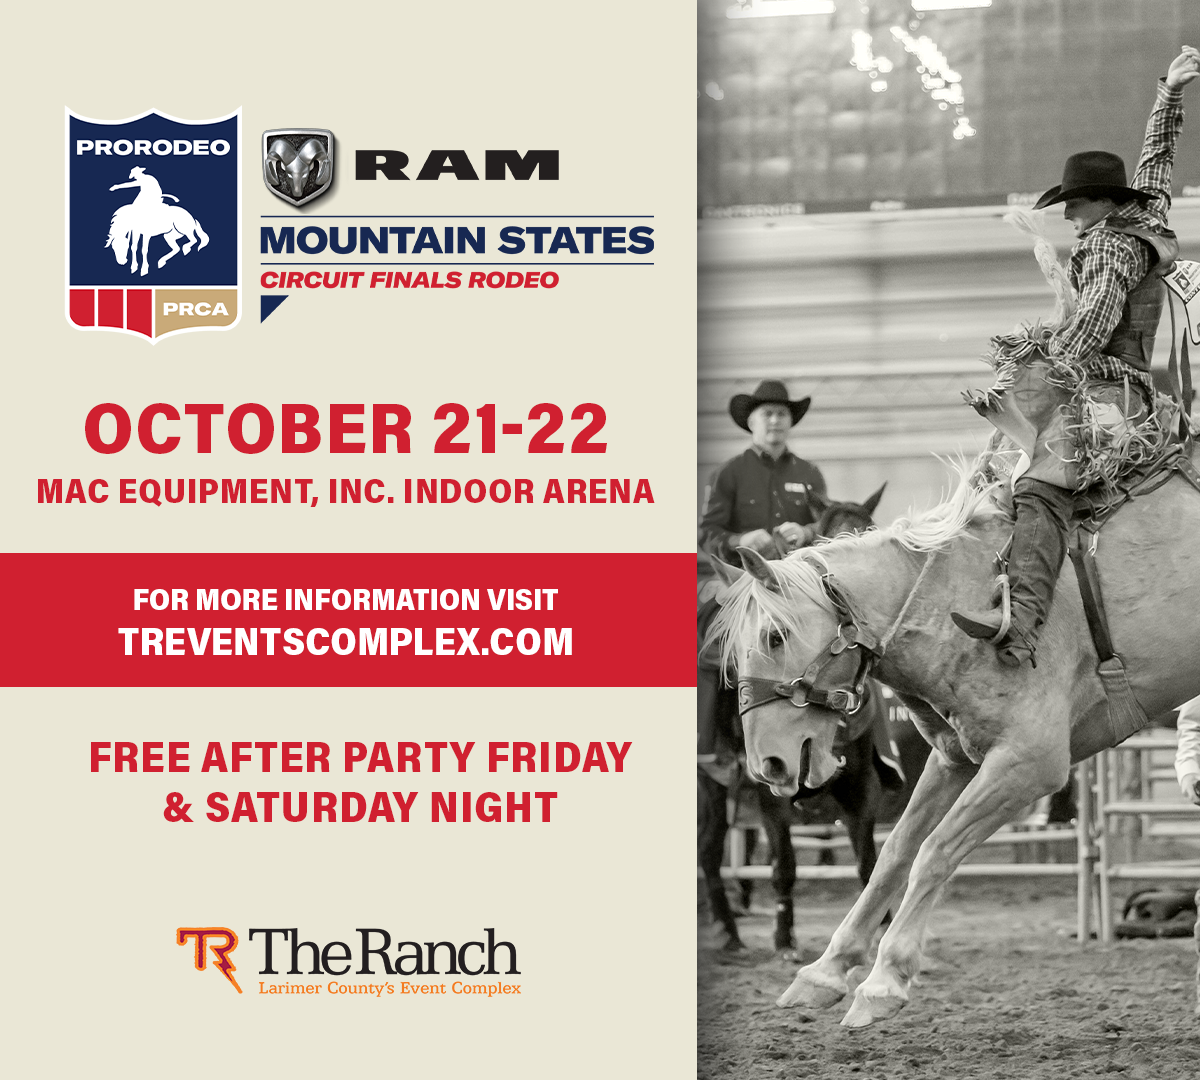 The PRCA Ram Mountain States Circuit Finals Rodeo Returns